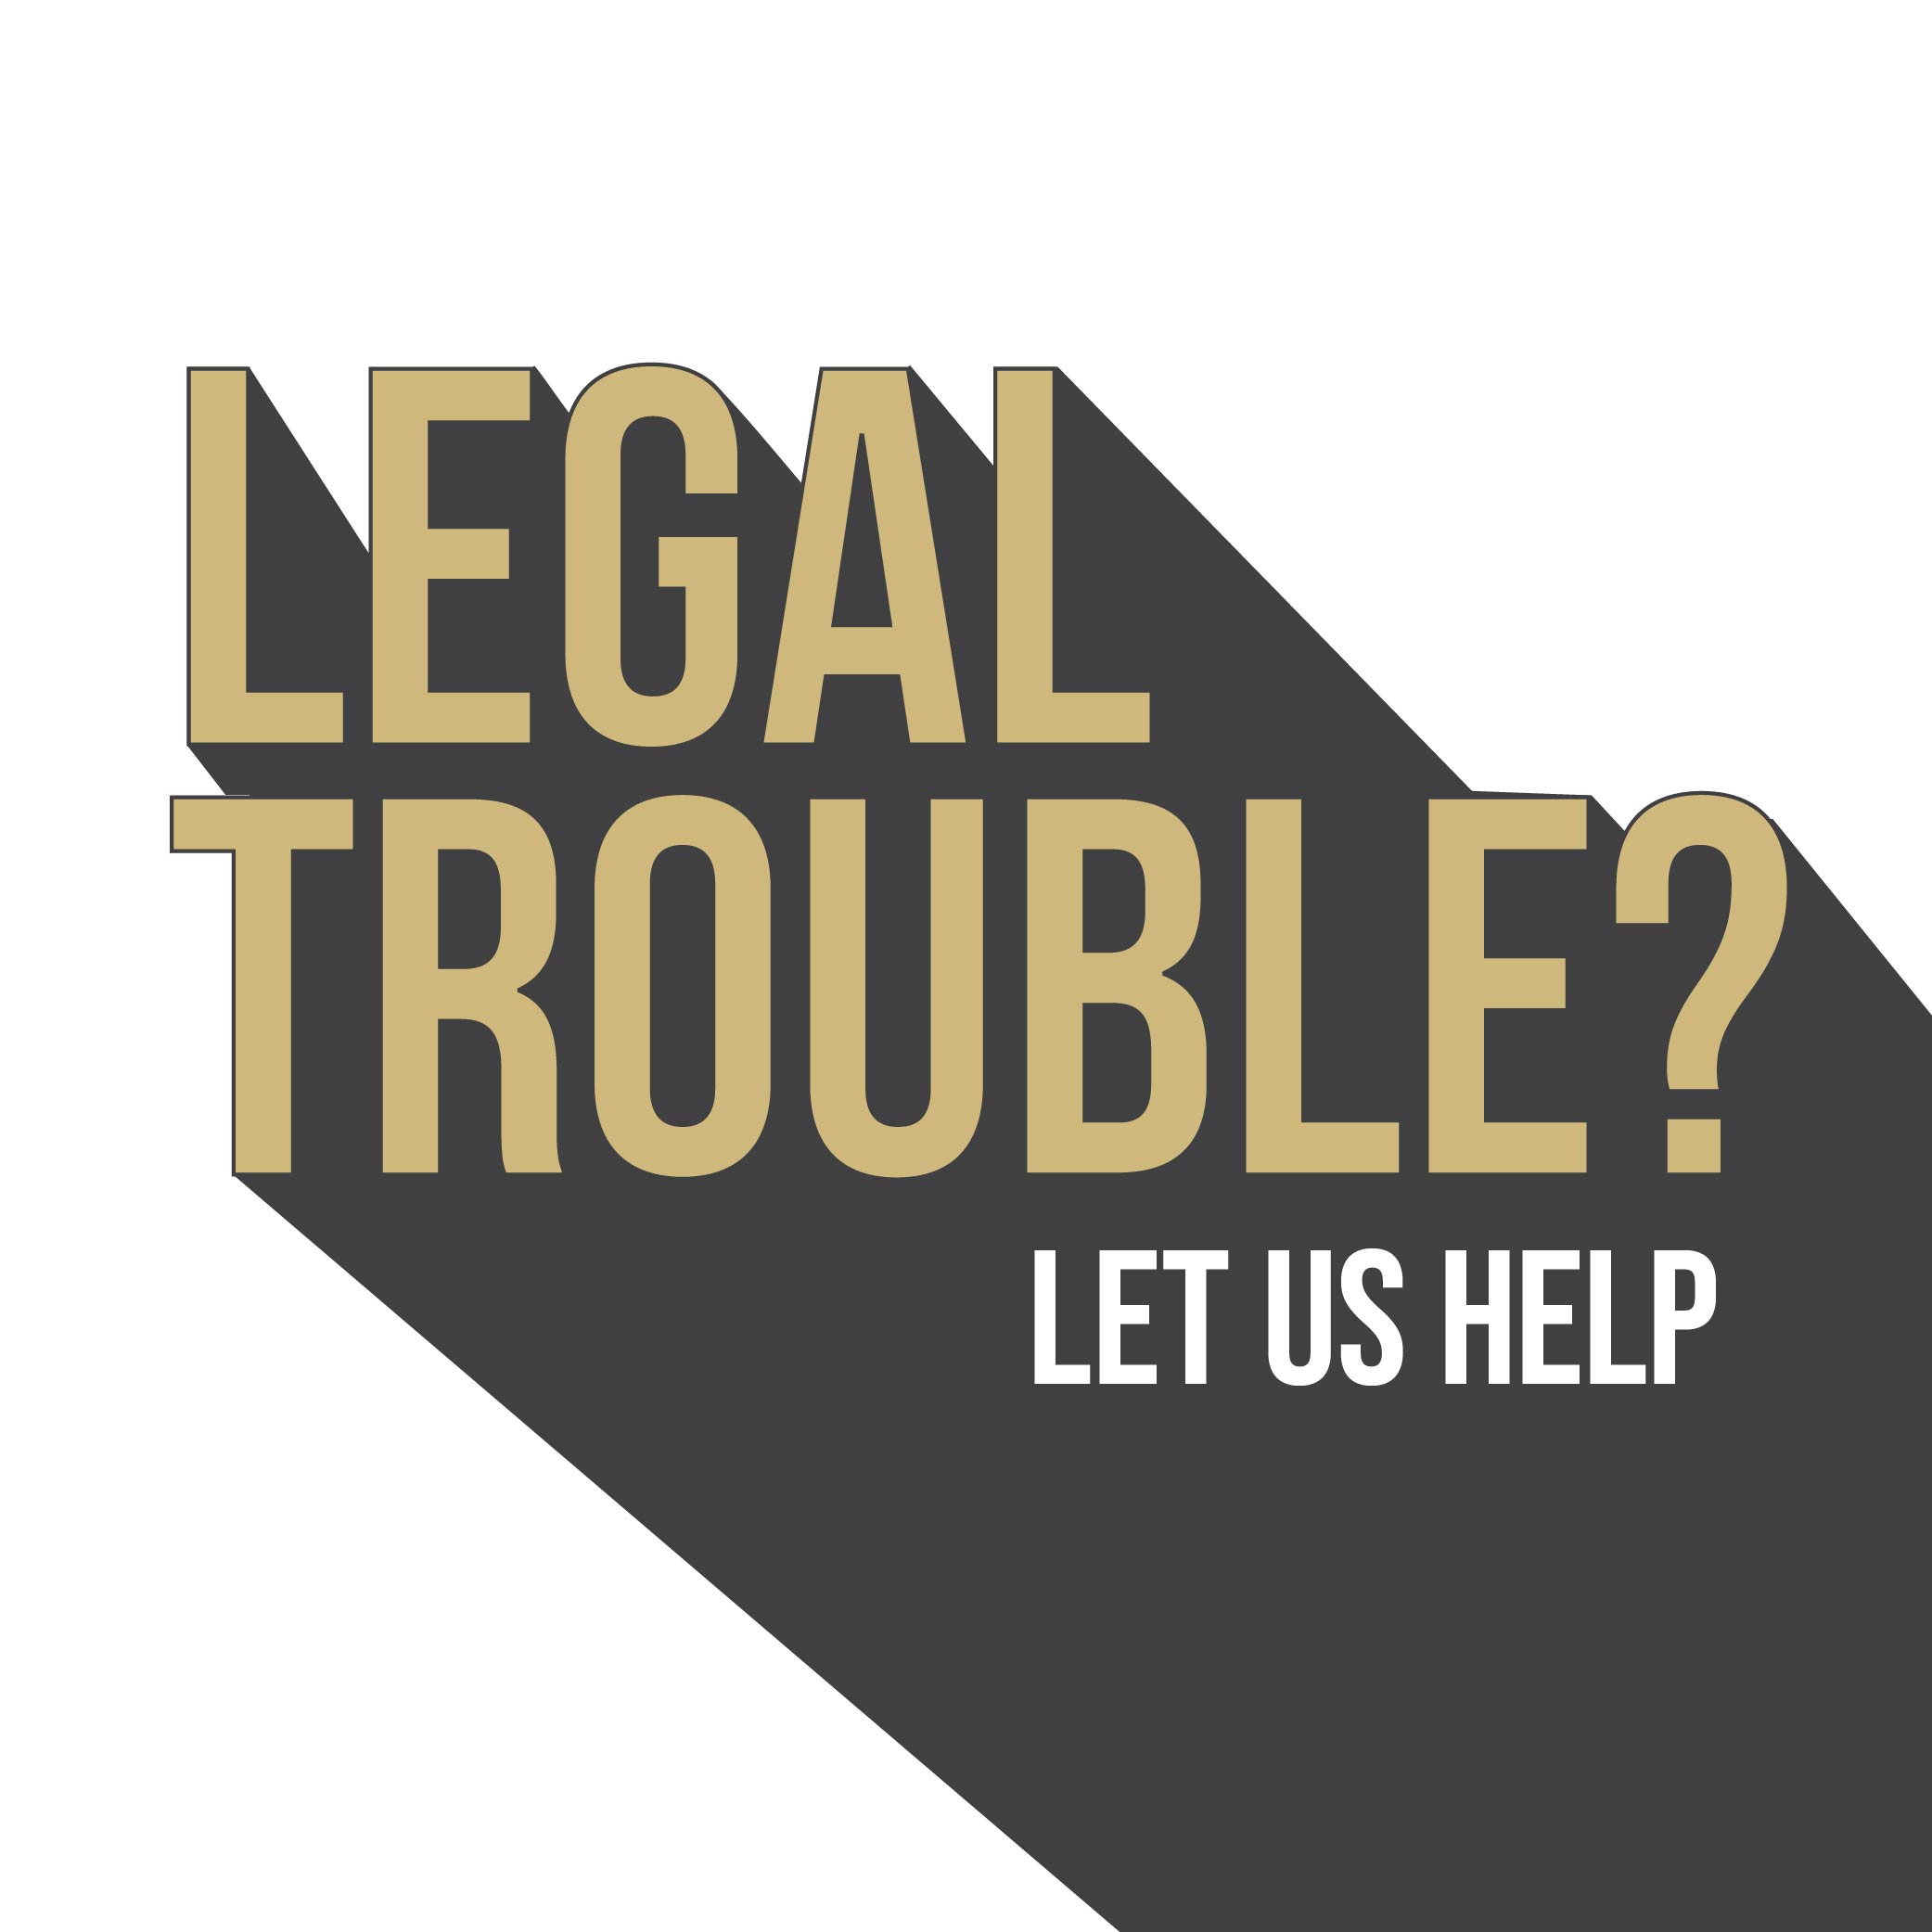 graphic that says 'Legal trouble? Let us help'